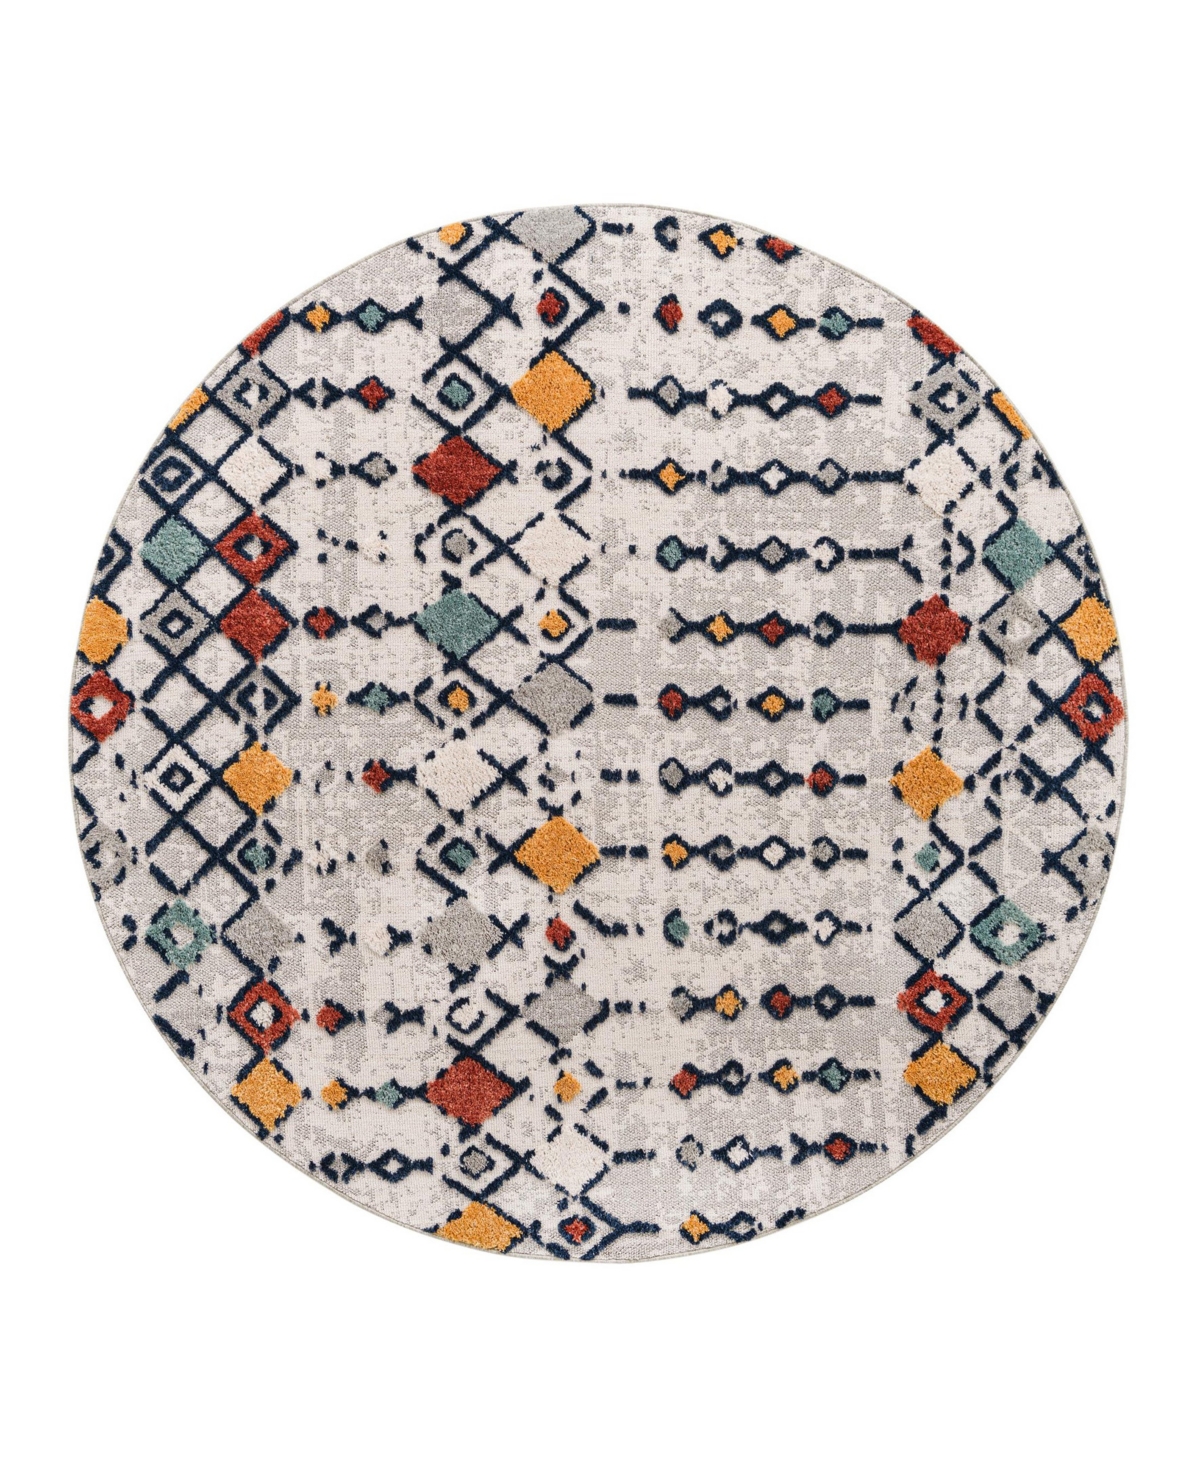 Bayshore Home High-low Pile Upland Upl02 7' X 7' Round Area Rug In Multi